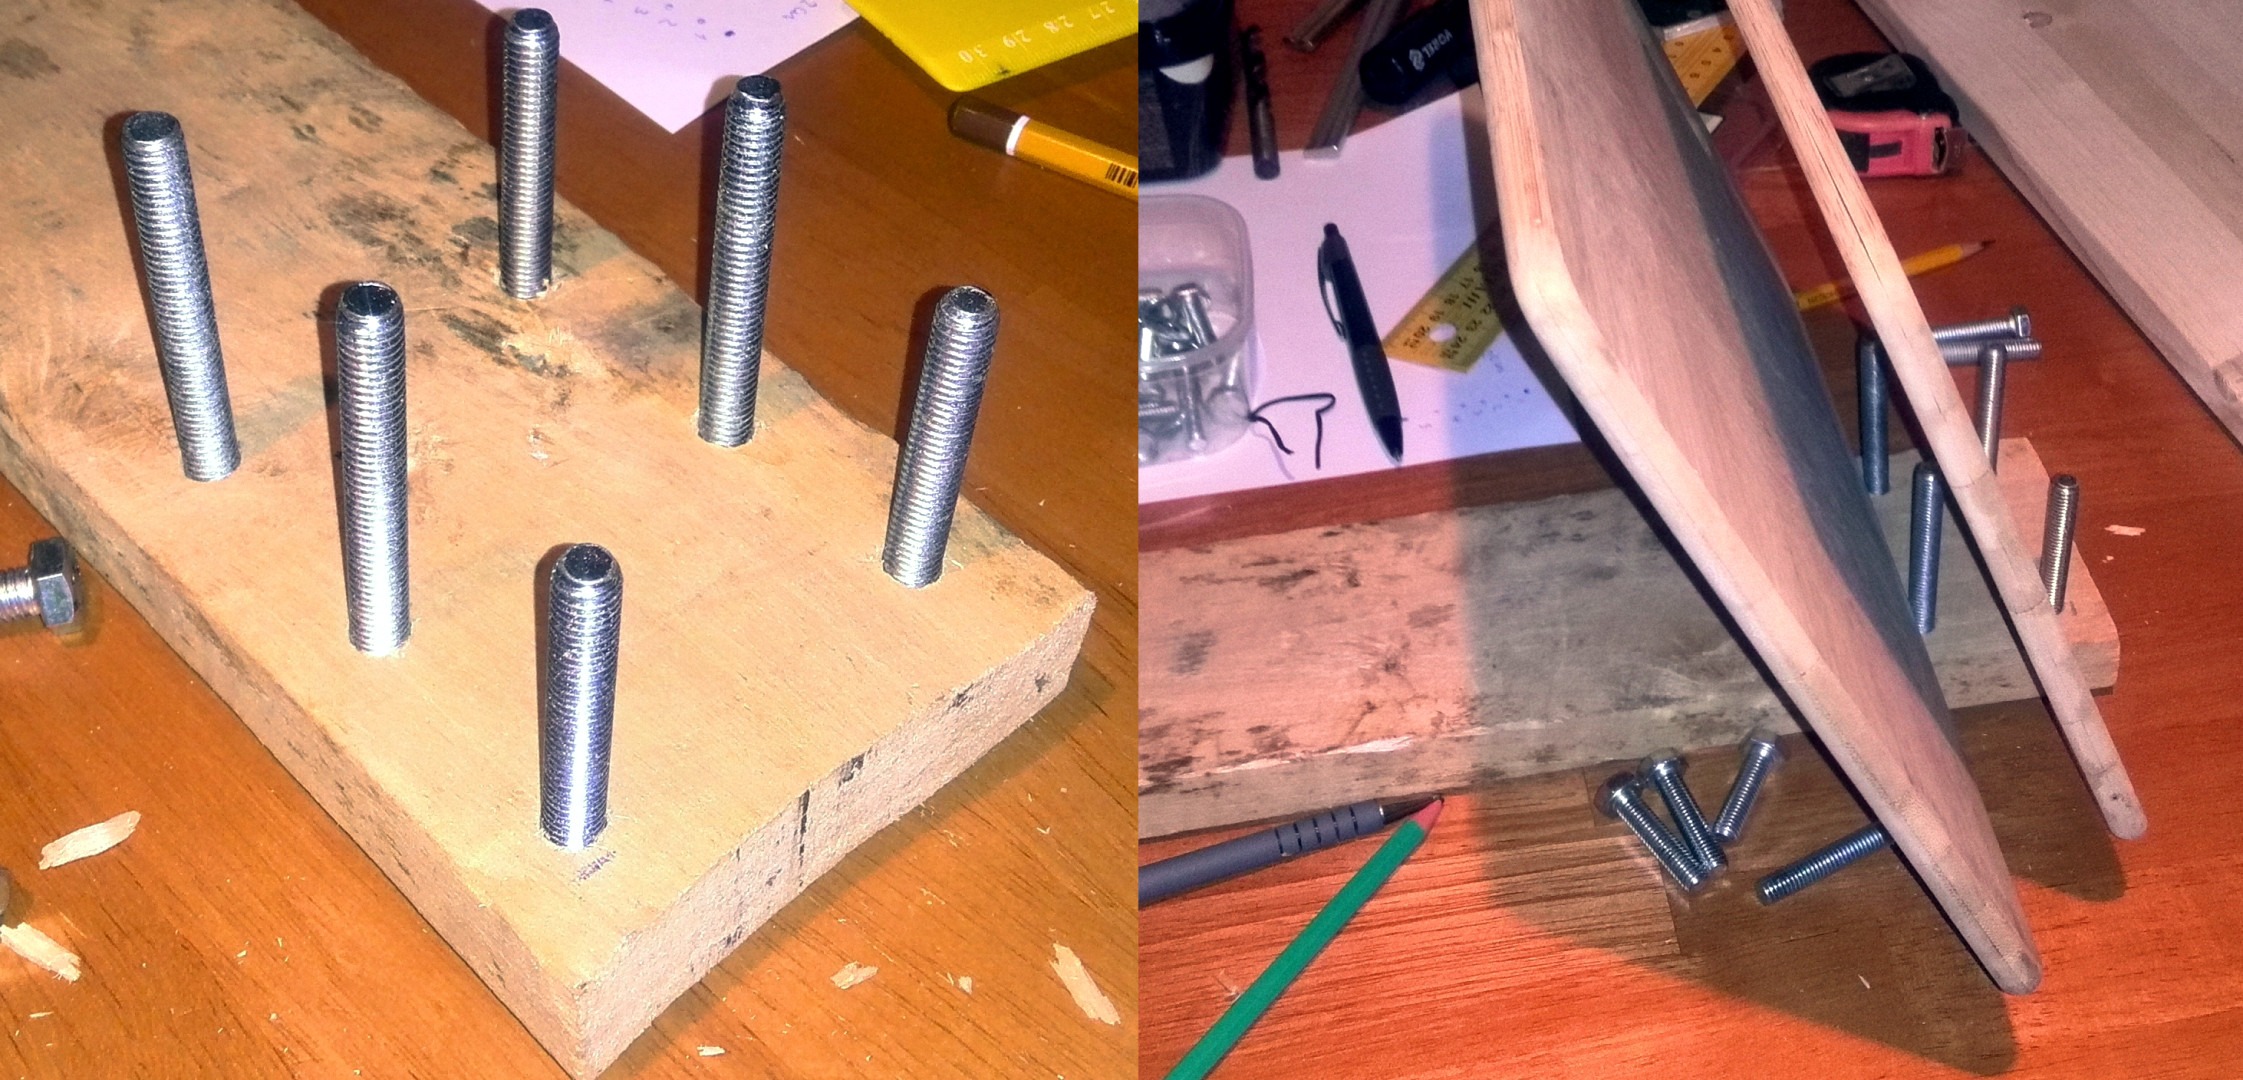 http://diyprojects.eu/wp-content/uploads/2017/02/wooden-cutting-boards-rack-holder-testing-distance-with-bolts.jpg